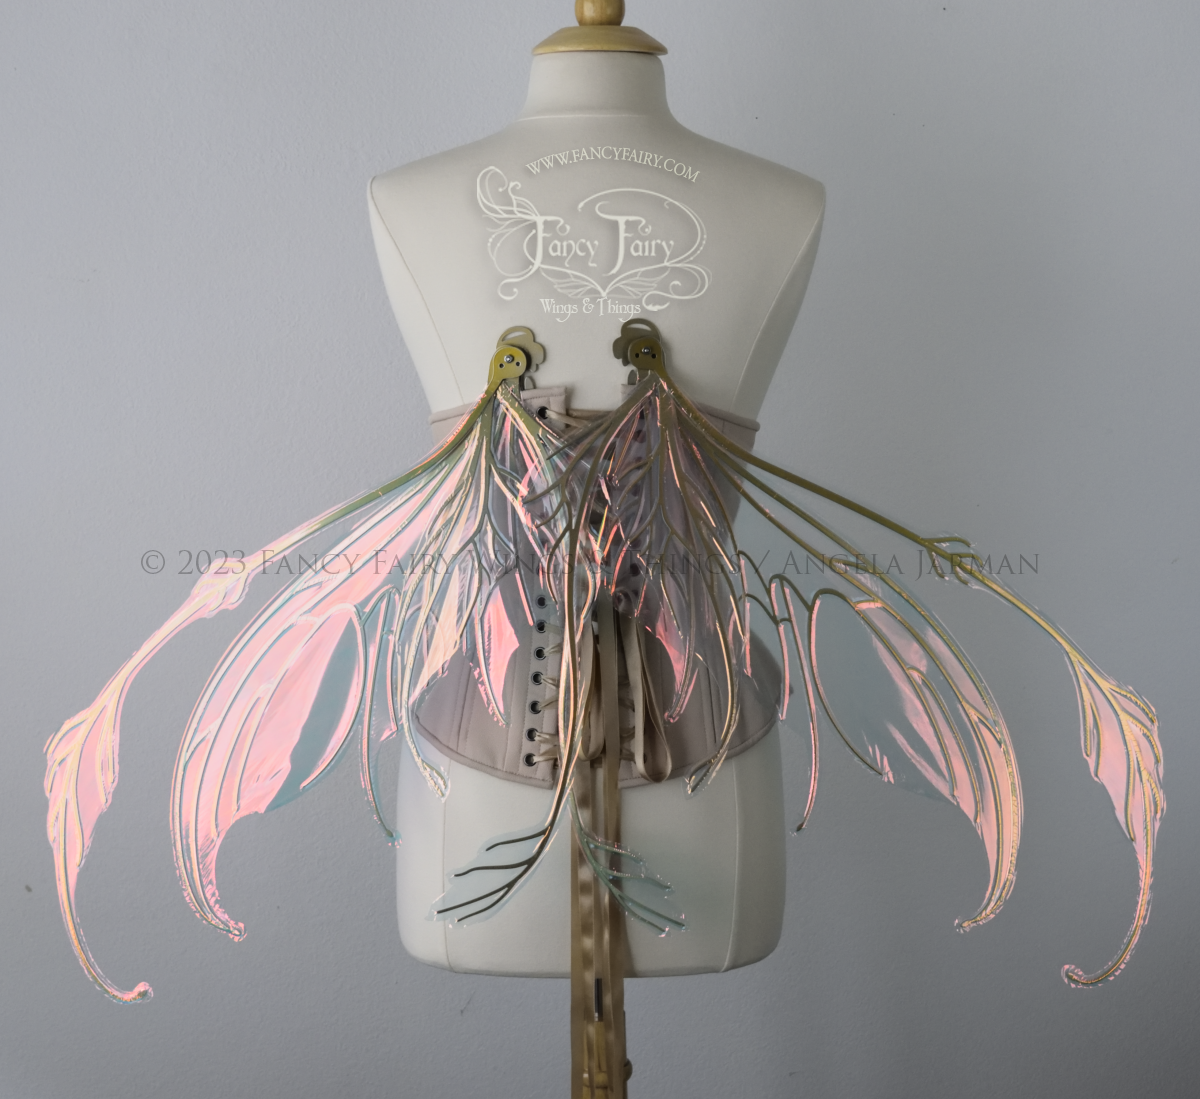 Back view of an ivory dress form wearing an underbust corset & 'Fauna' pinkish iridescent fairy wings with gold veining, in resting position